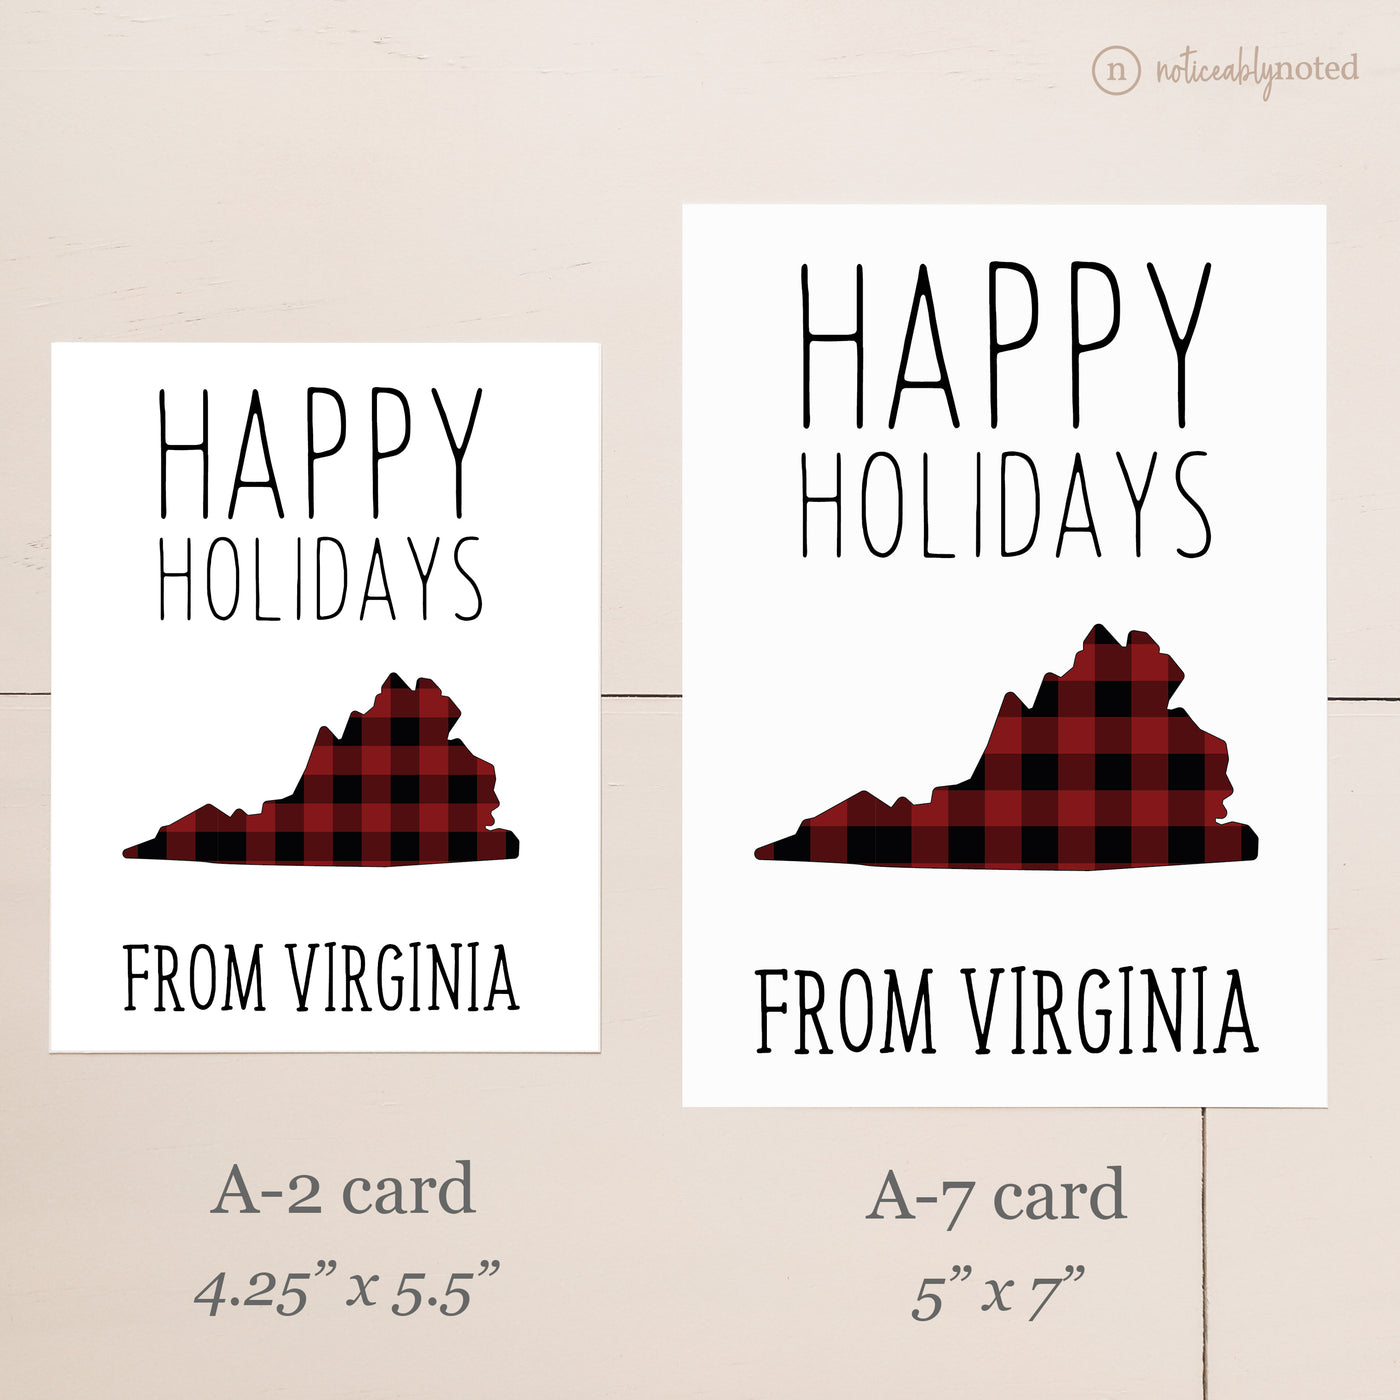 Virginia Holiday Card - Card Comparison | Noticeably Noted